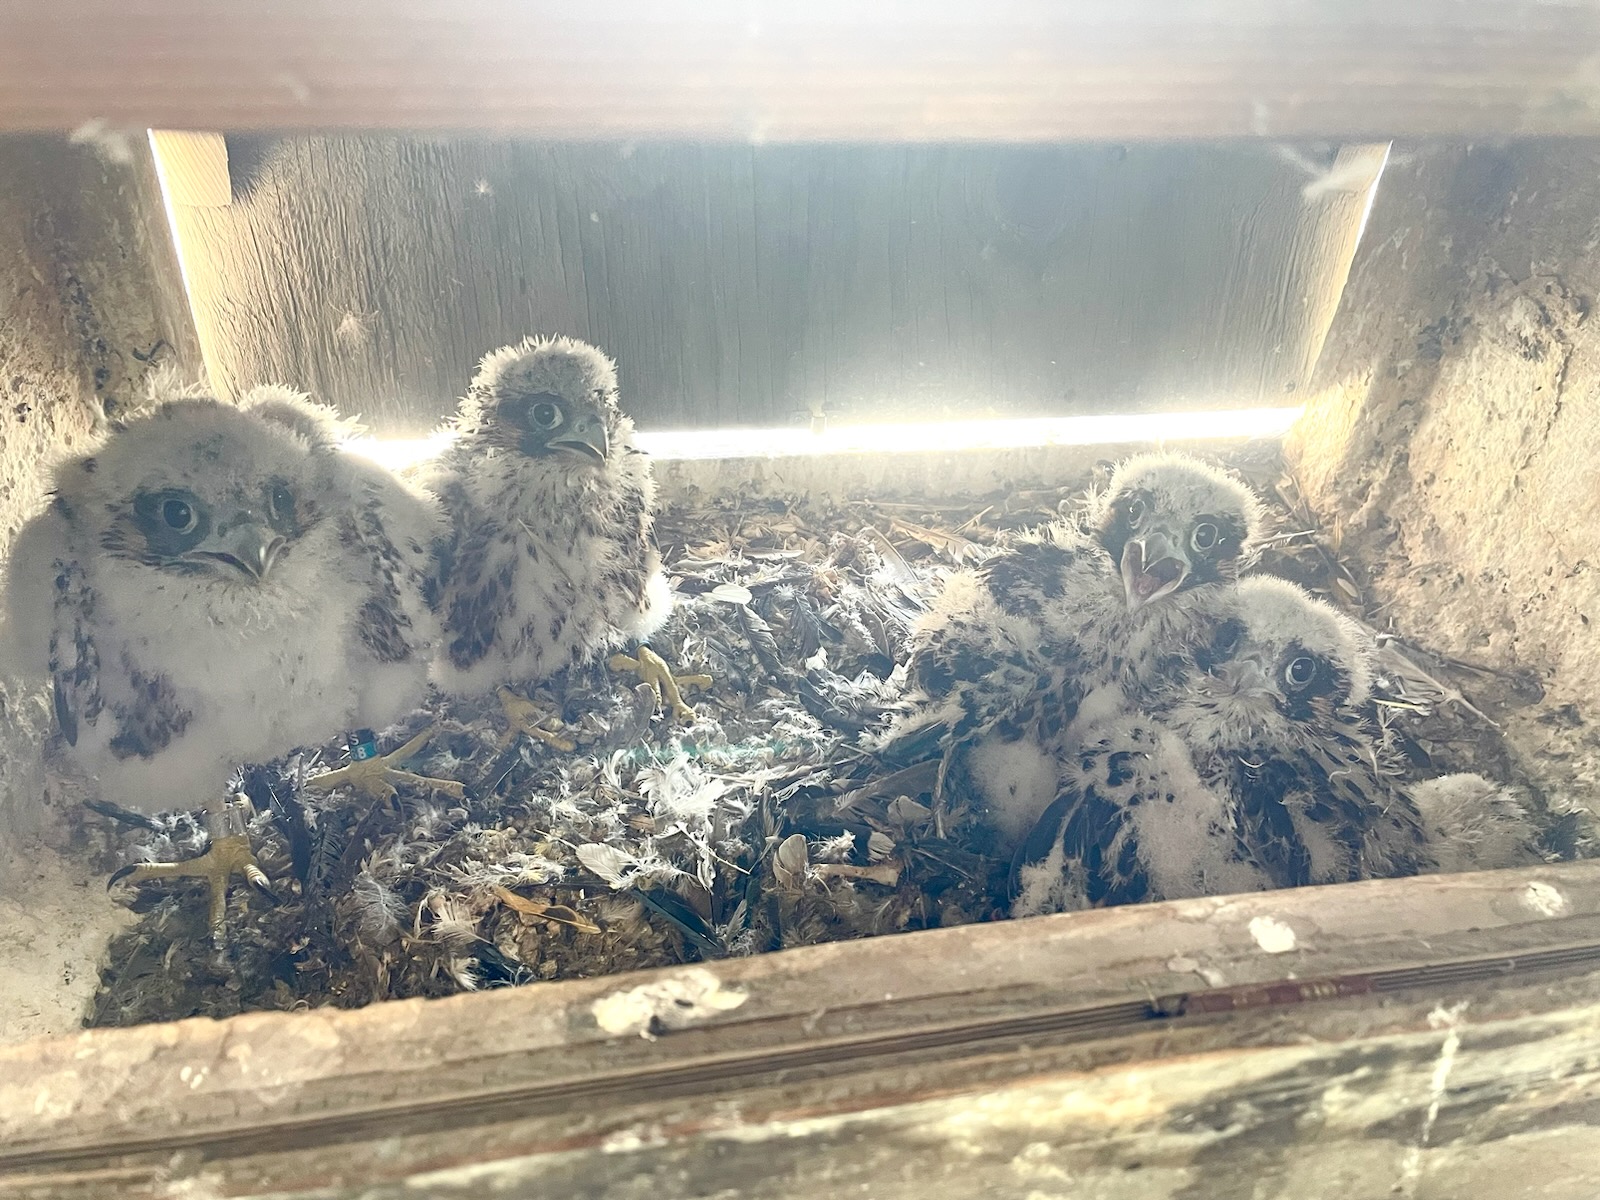 baby peregrine falcons in a nesting box